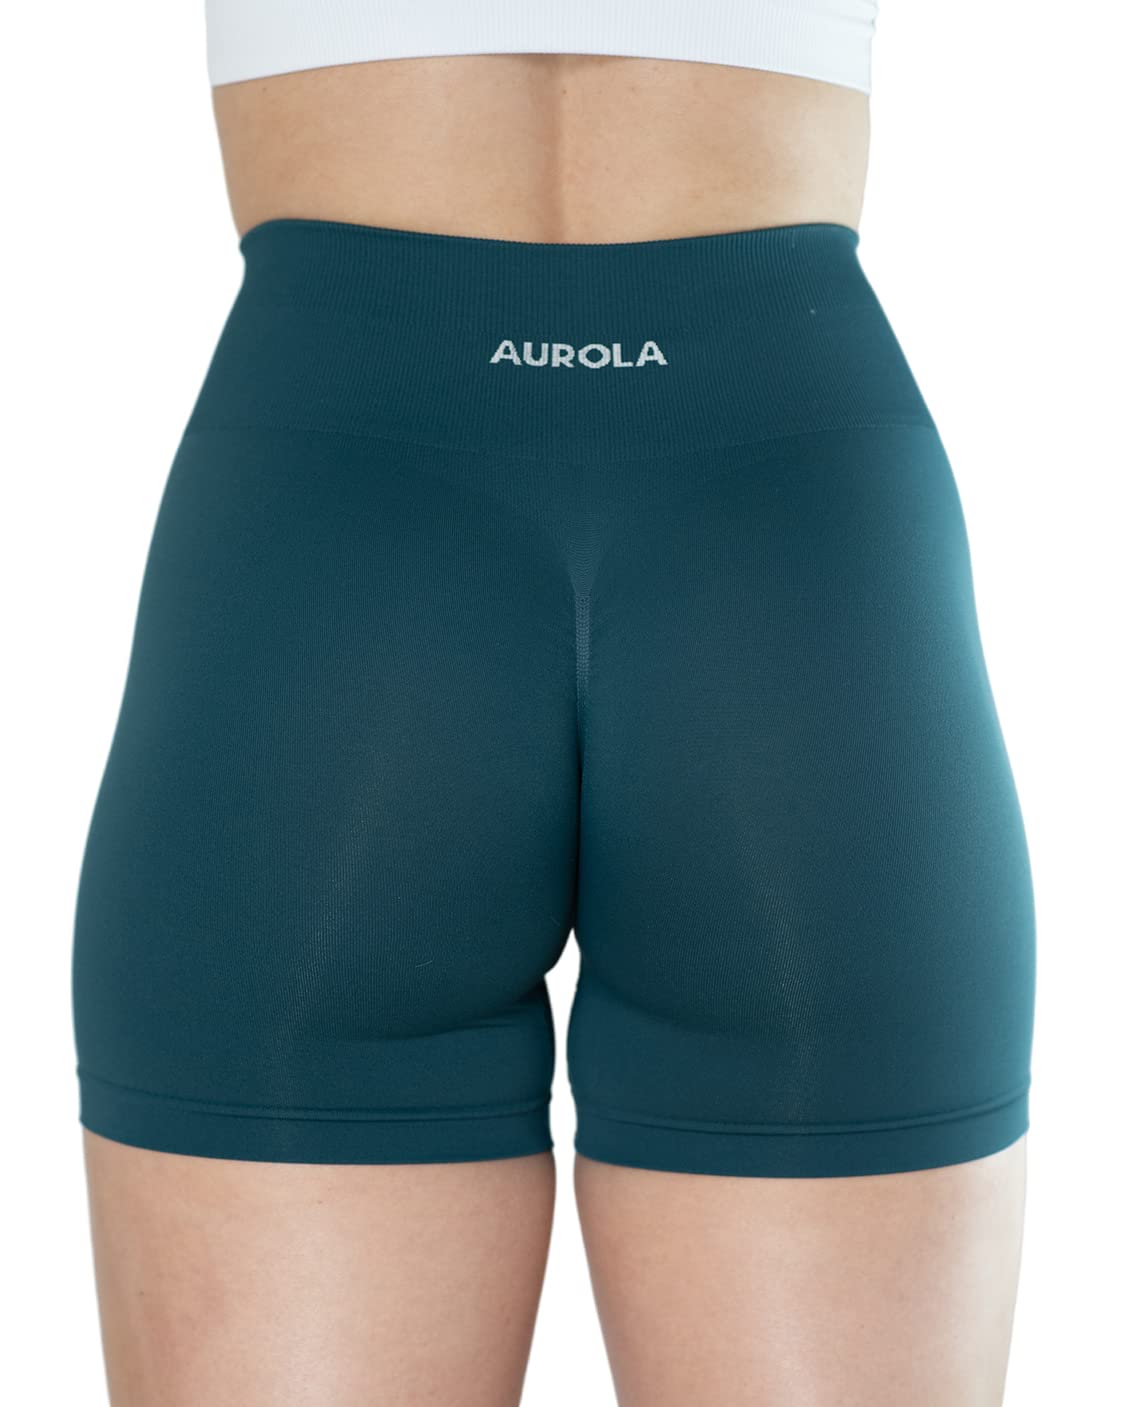 Buy AUROLA Dream Collection Workout Shorts for Women High Waist Seamless  Scrunch Athletic Running Gym Yoga Active Shorts Black